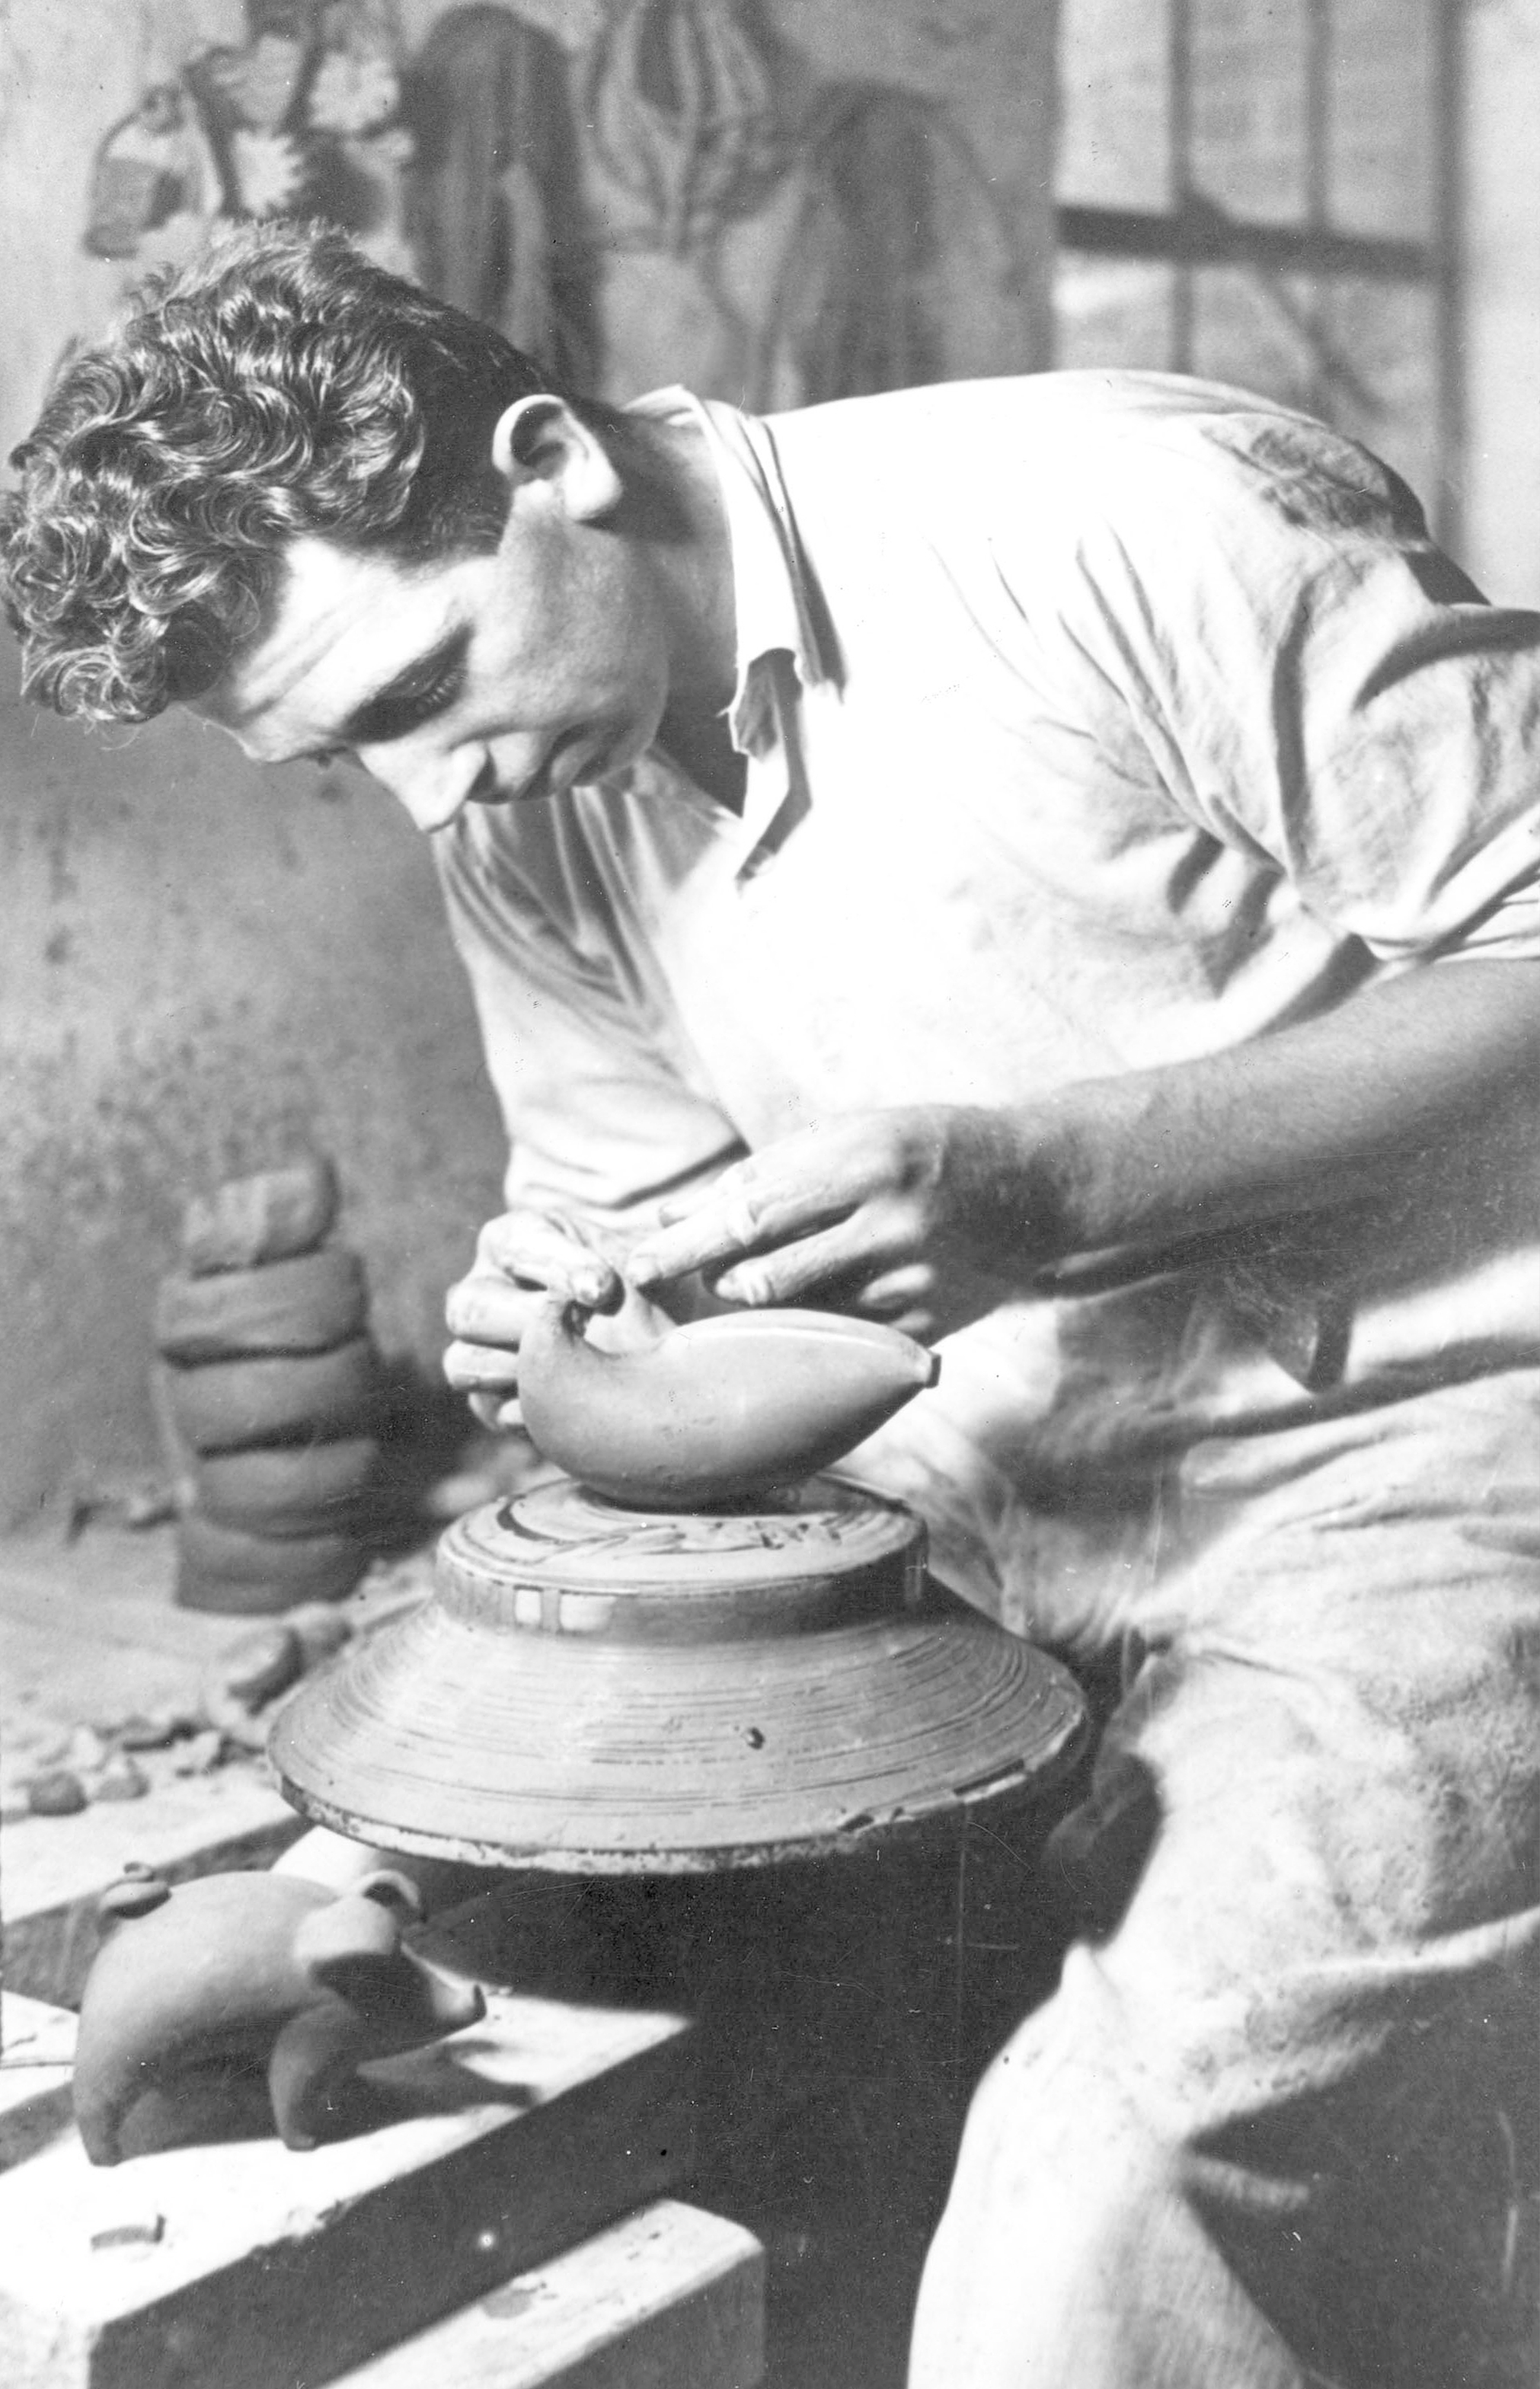 Nils Kähler in the process of making a vase